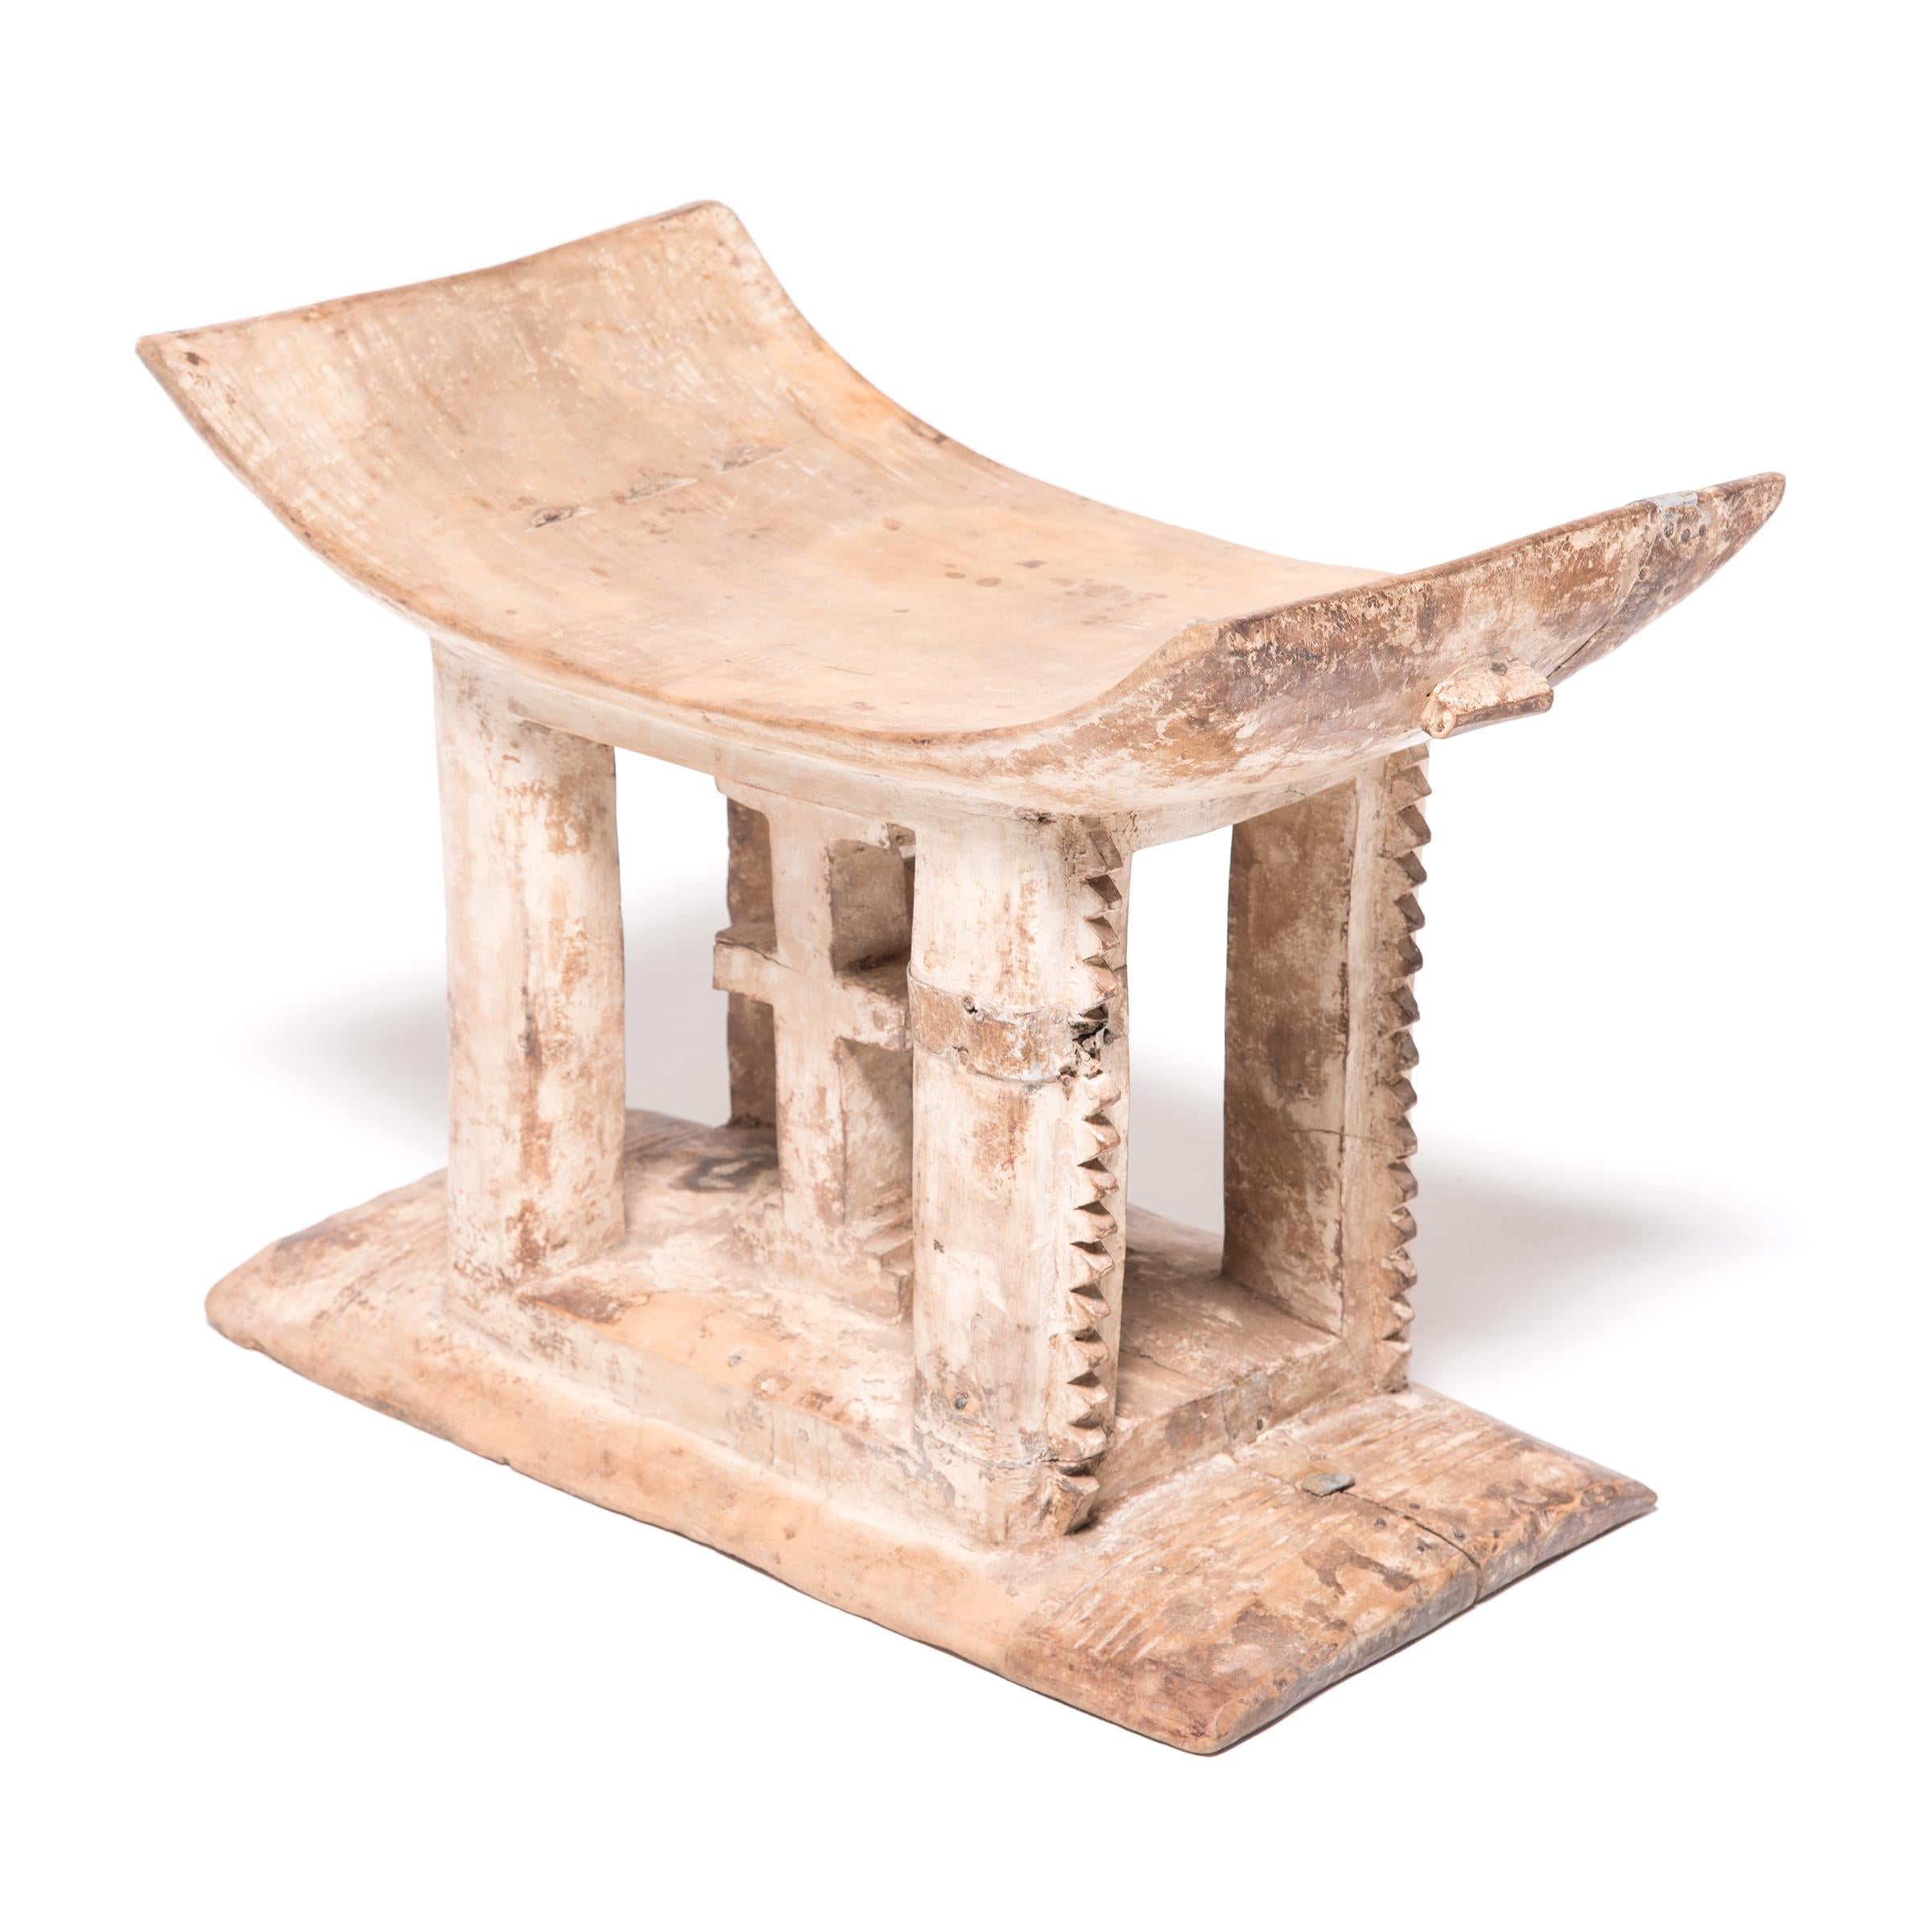 Stools indicated power, status, and lines of succession in traditional Ashanti culture. The flat base, curved seat, and ridged supports reference the Ashanti King Stool. This stool presents two central different symbols. The heart 